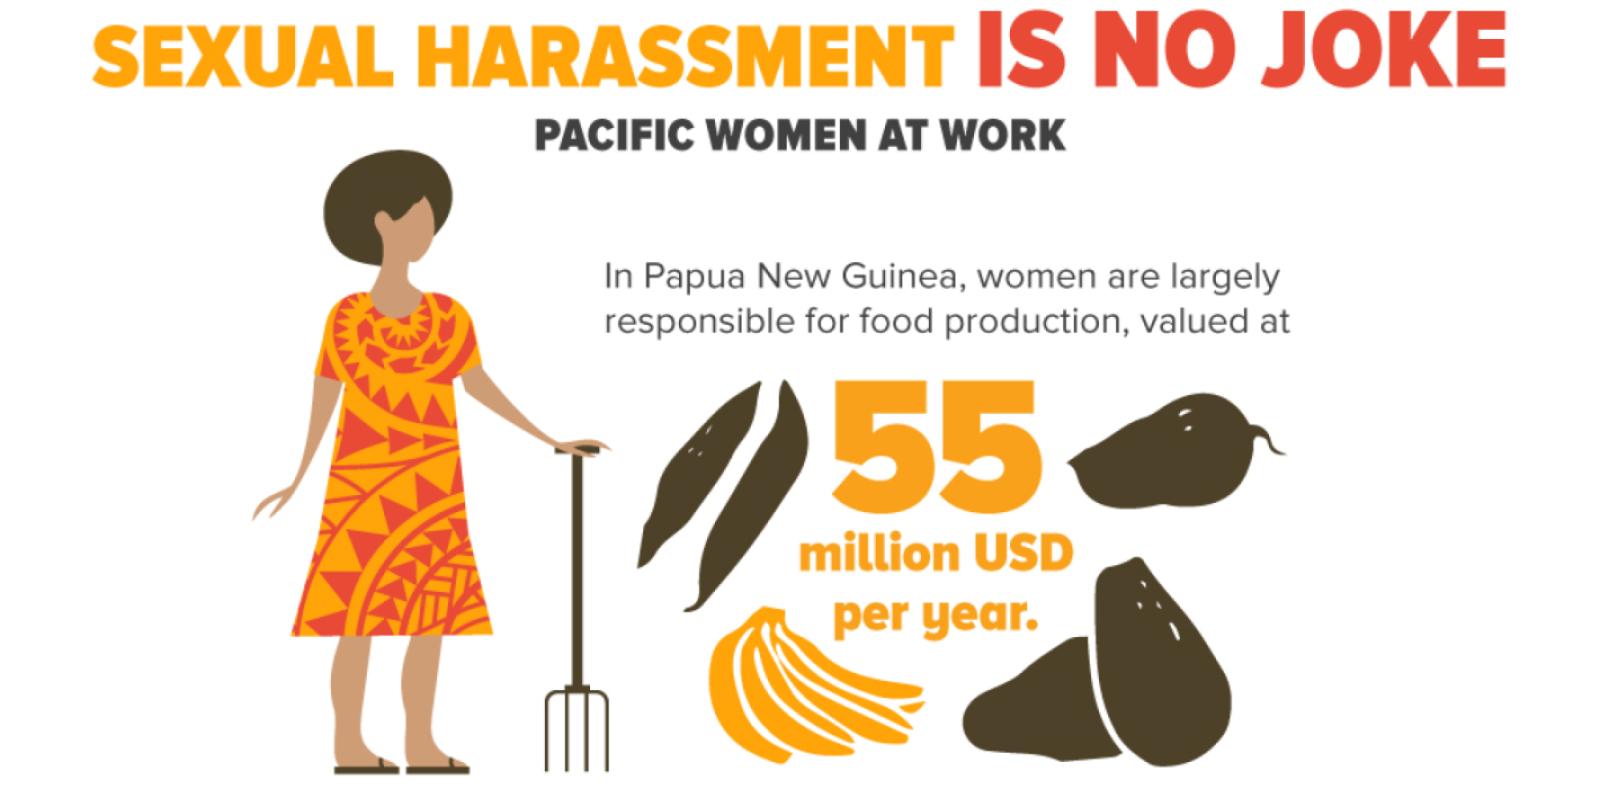 In Papua New Guinea, women are largely responsible for food production, valued at USD 55 million per year.